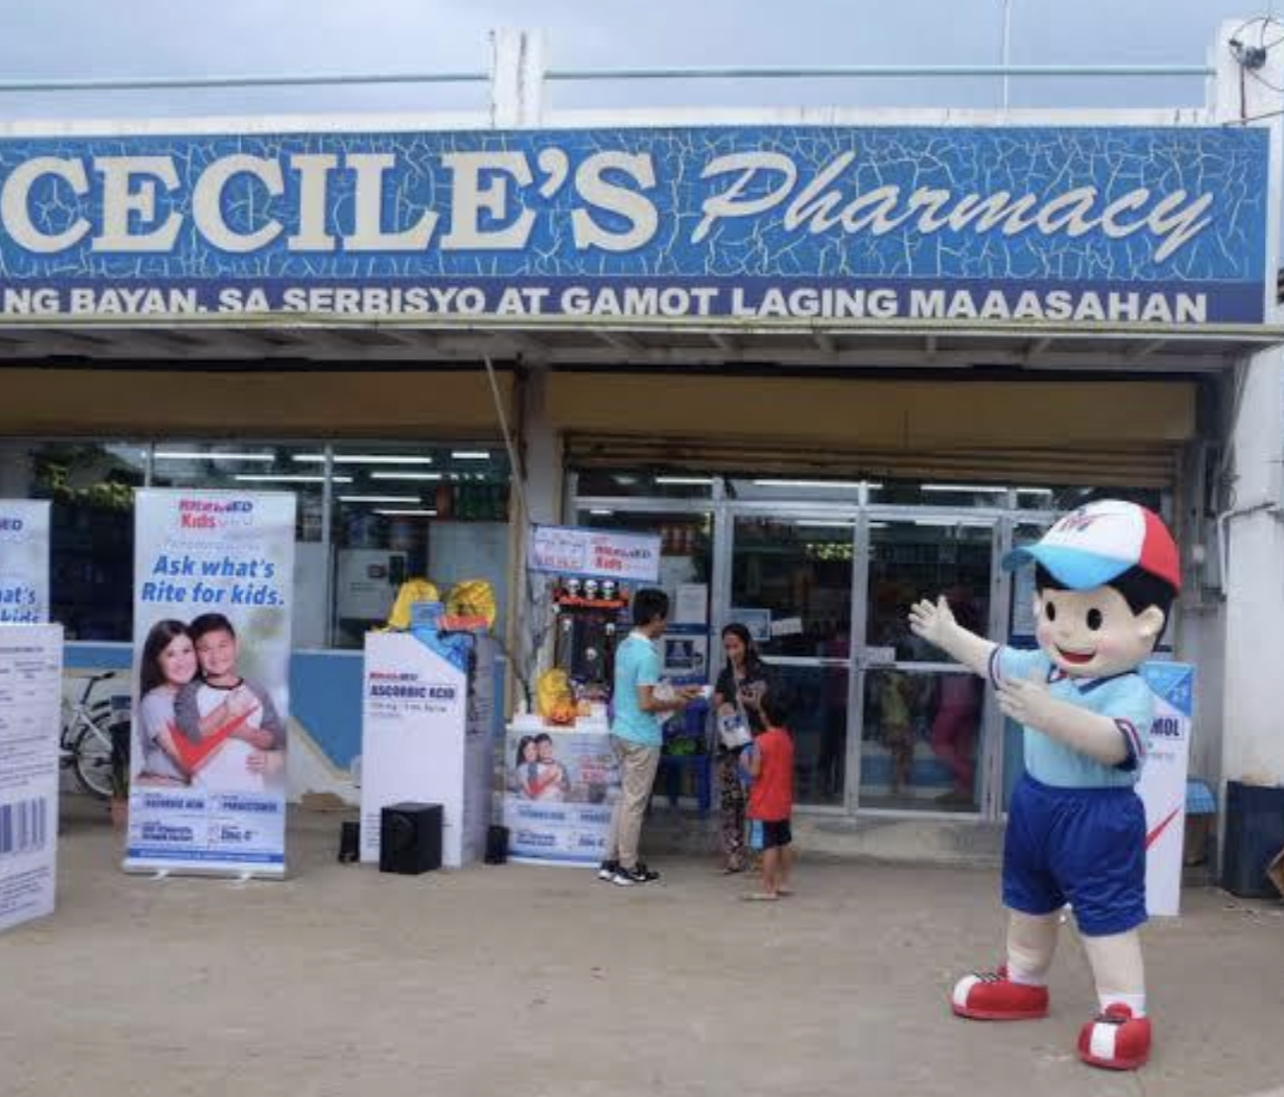 Cecile’s Pharmacy branch